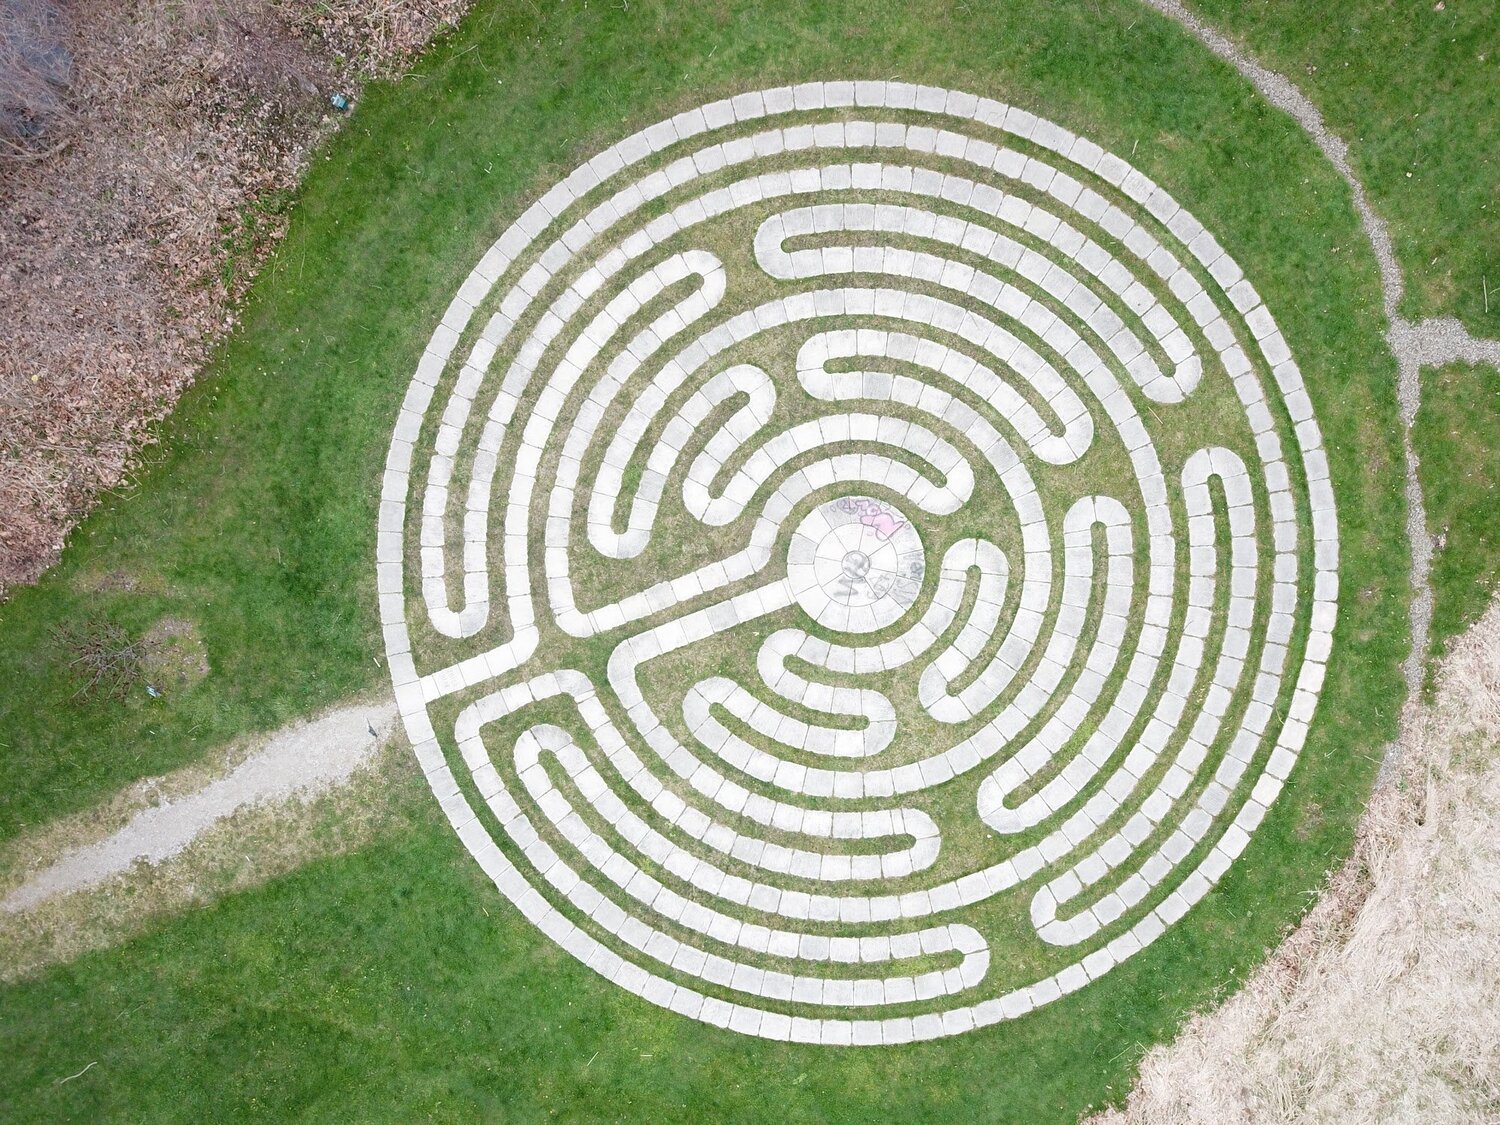 Can You Score Better Than 80% On This 24-Question English Quiz on Your First Try? Labyrinth maze